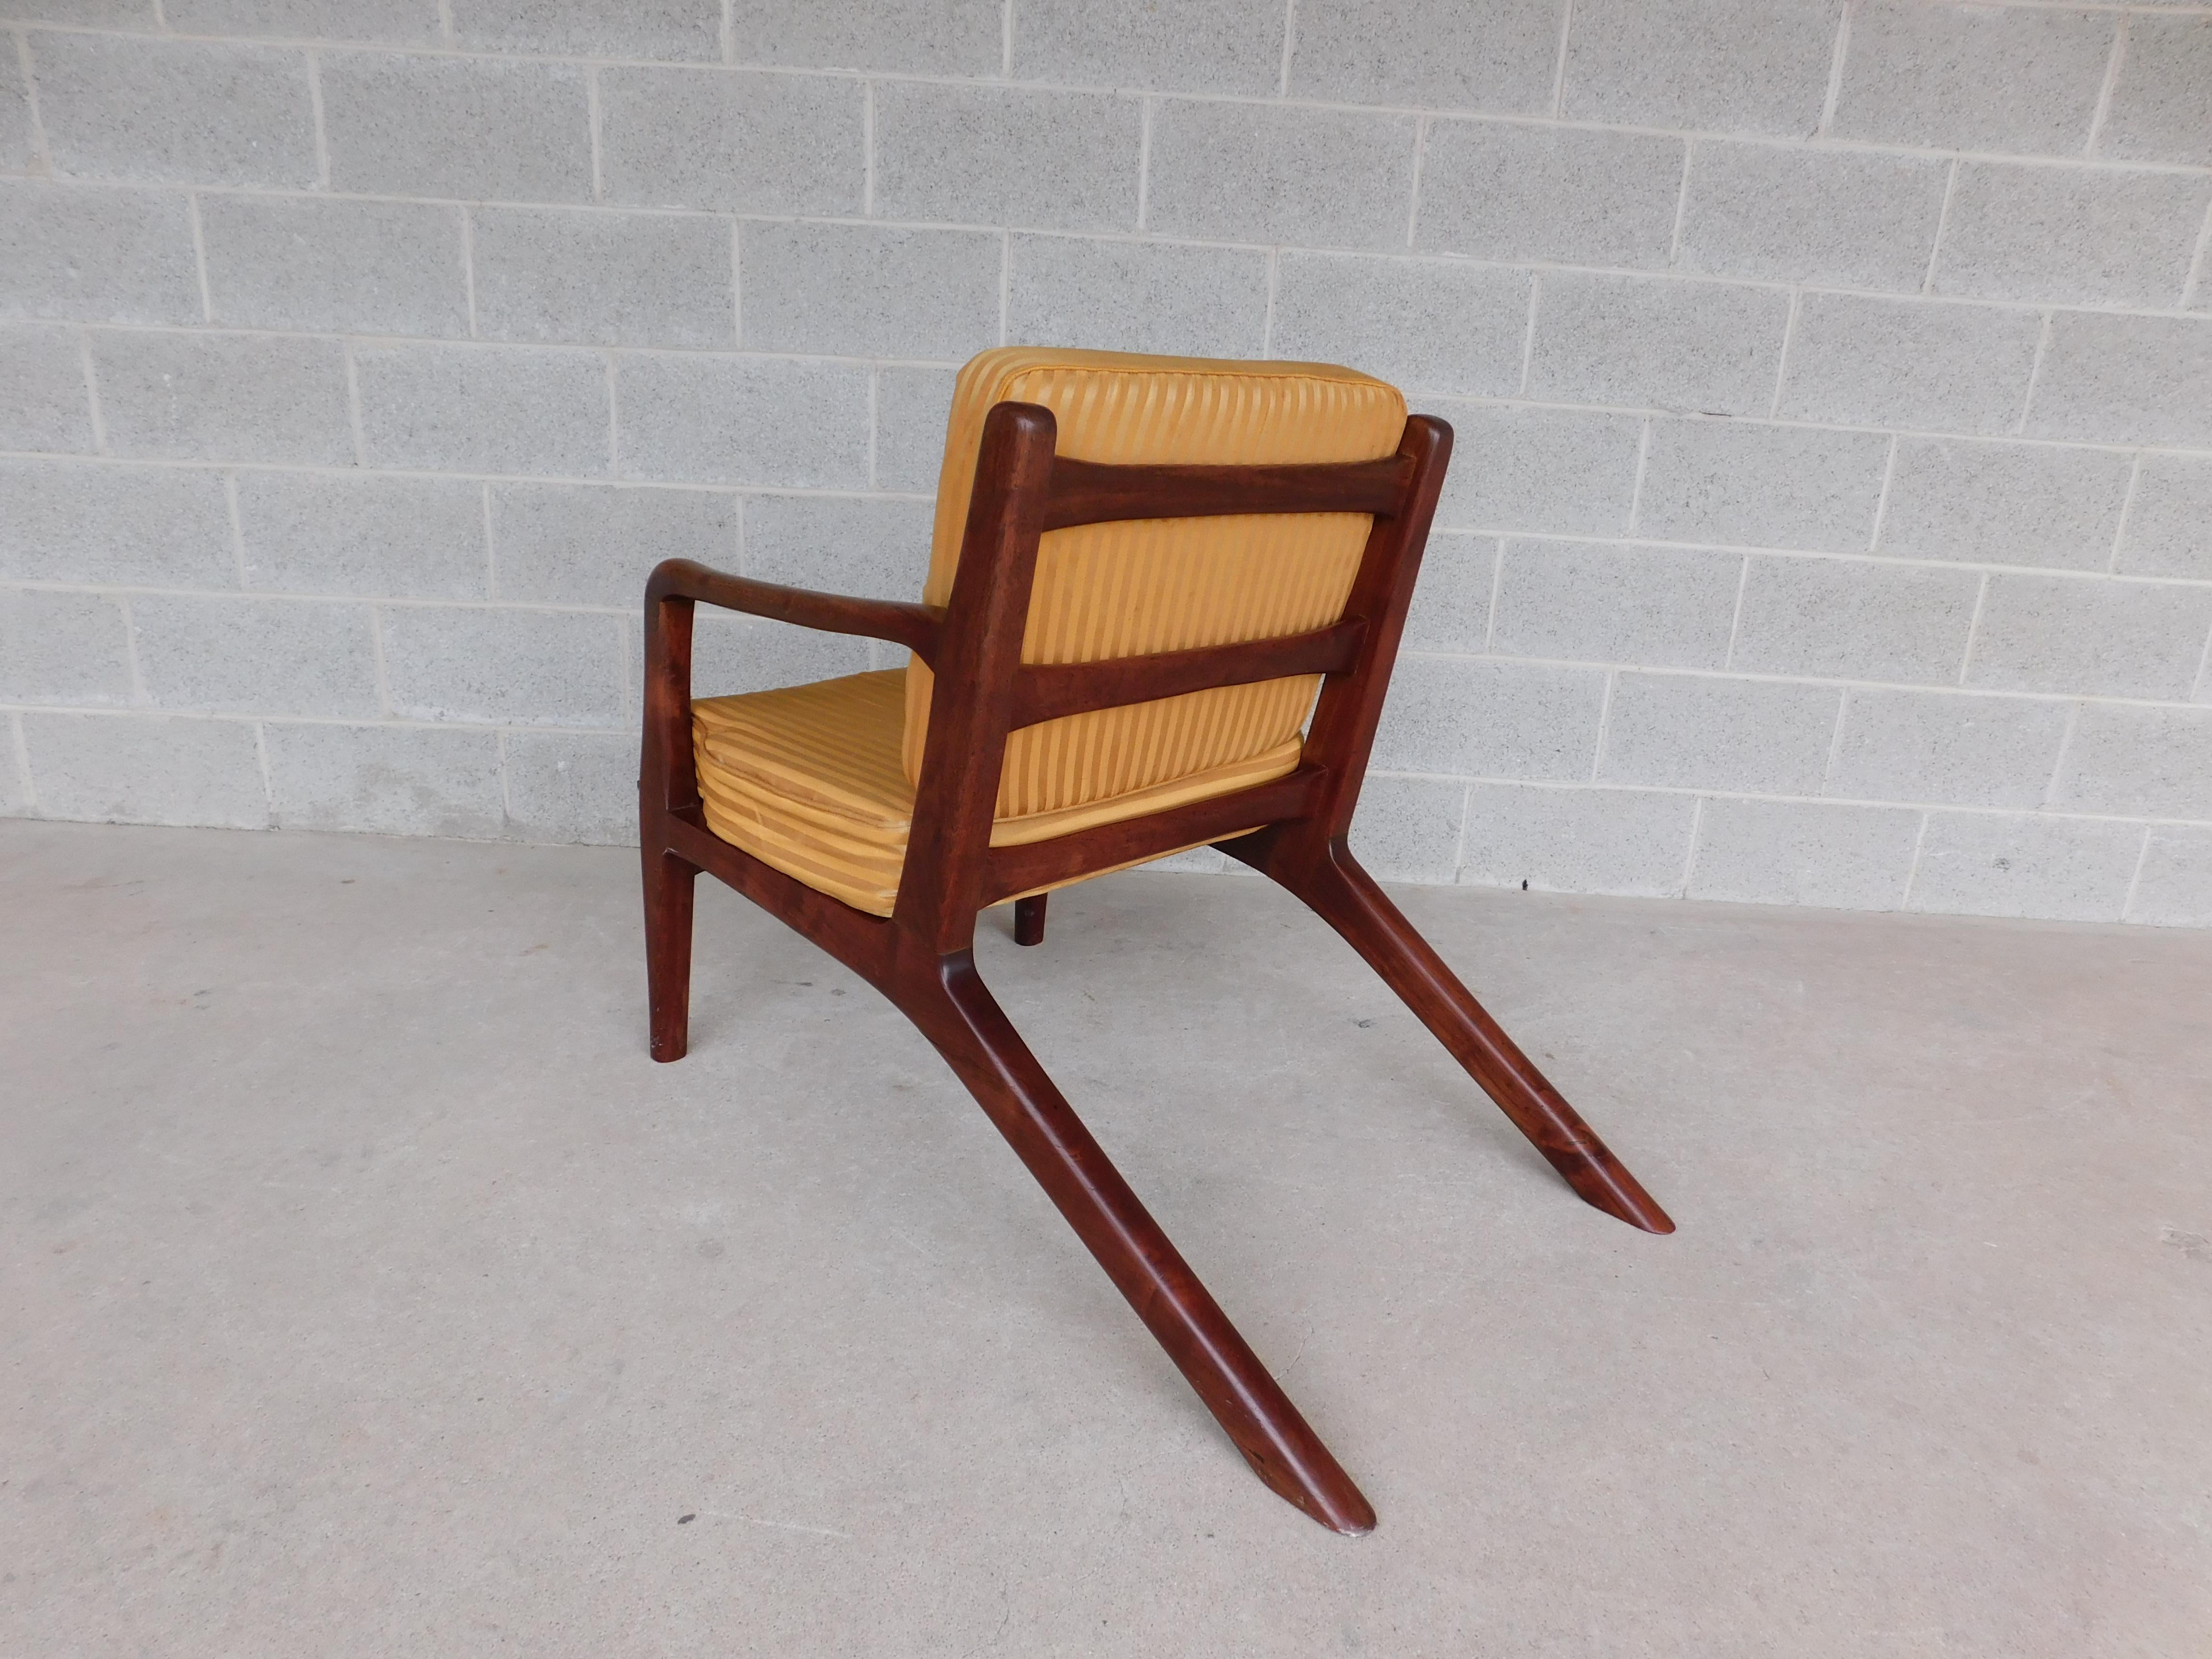 20th Century Vintage Teak Midcentury Lounge Chair Attributed to Hans Wegner For Sale